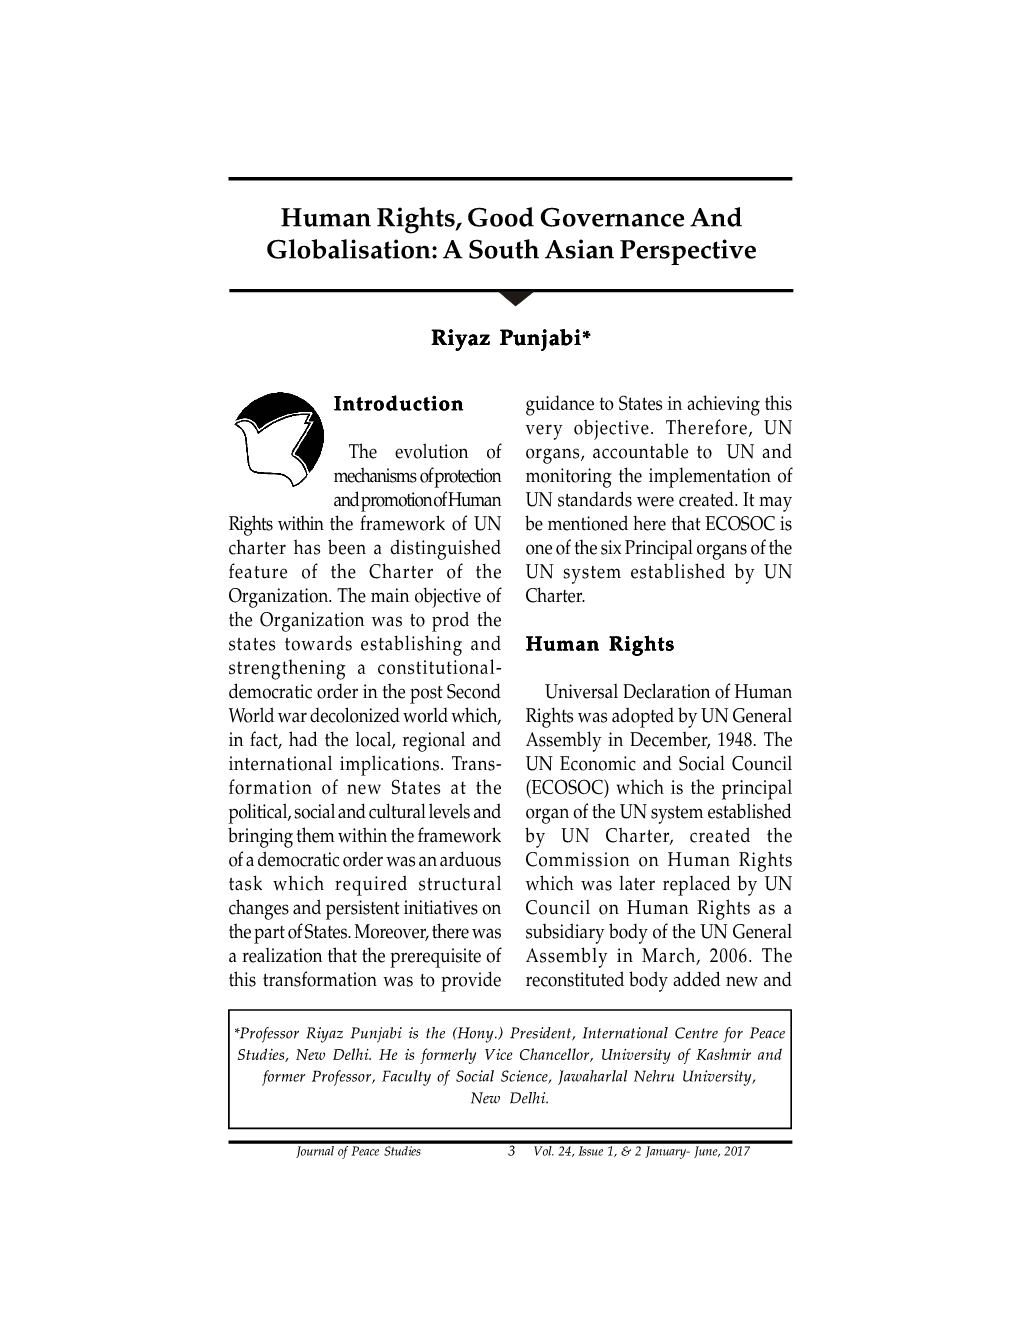 Human Rights, Good Governance and Globalisation: a South Asian Perspective